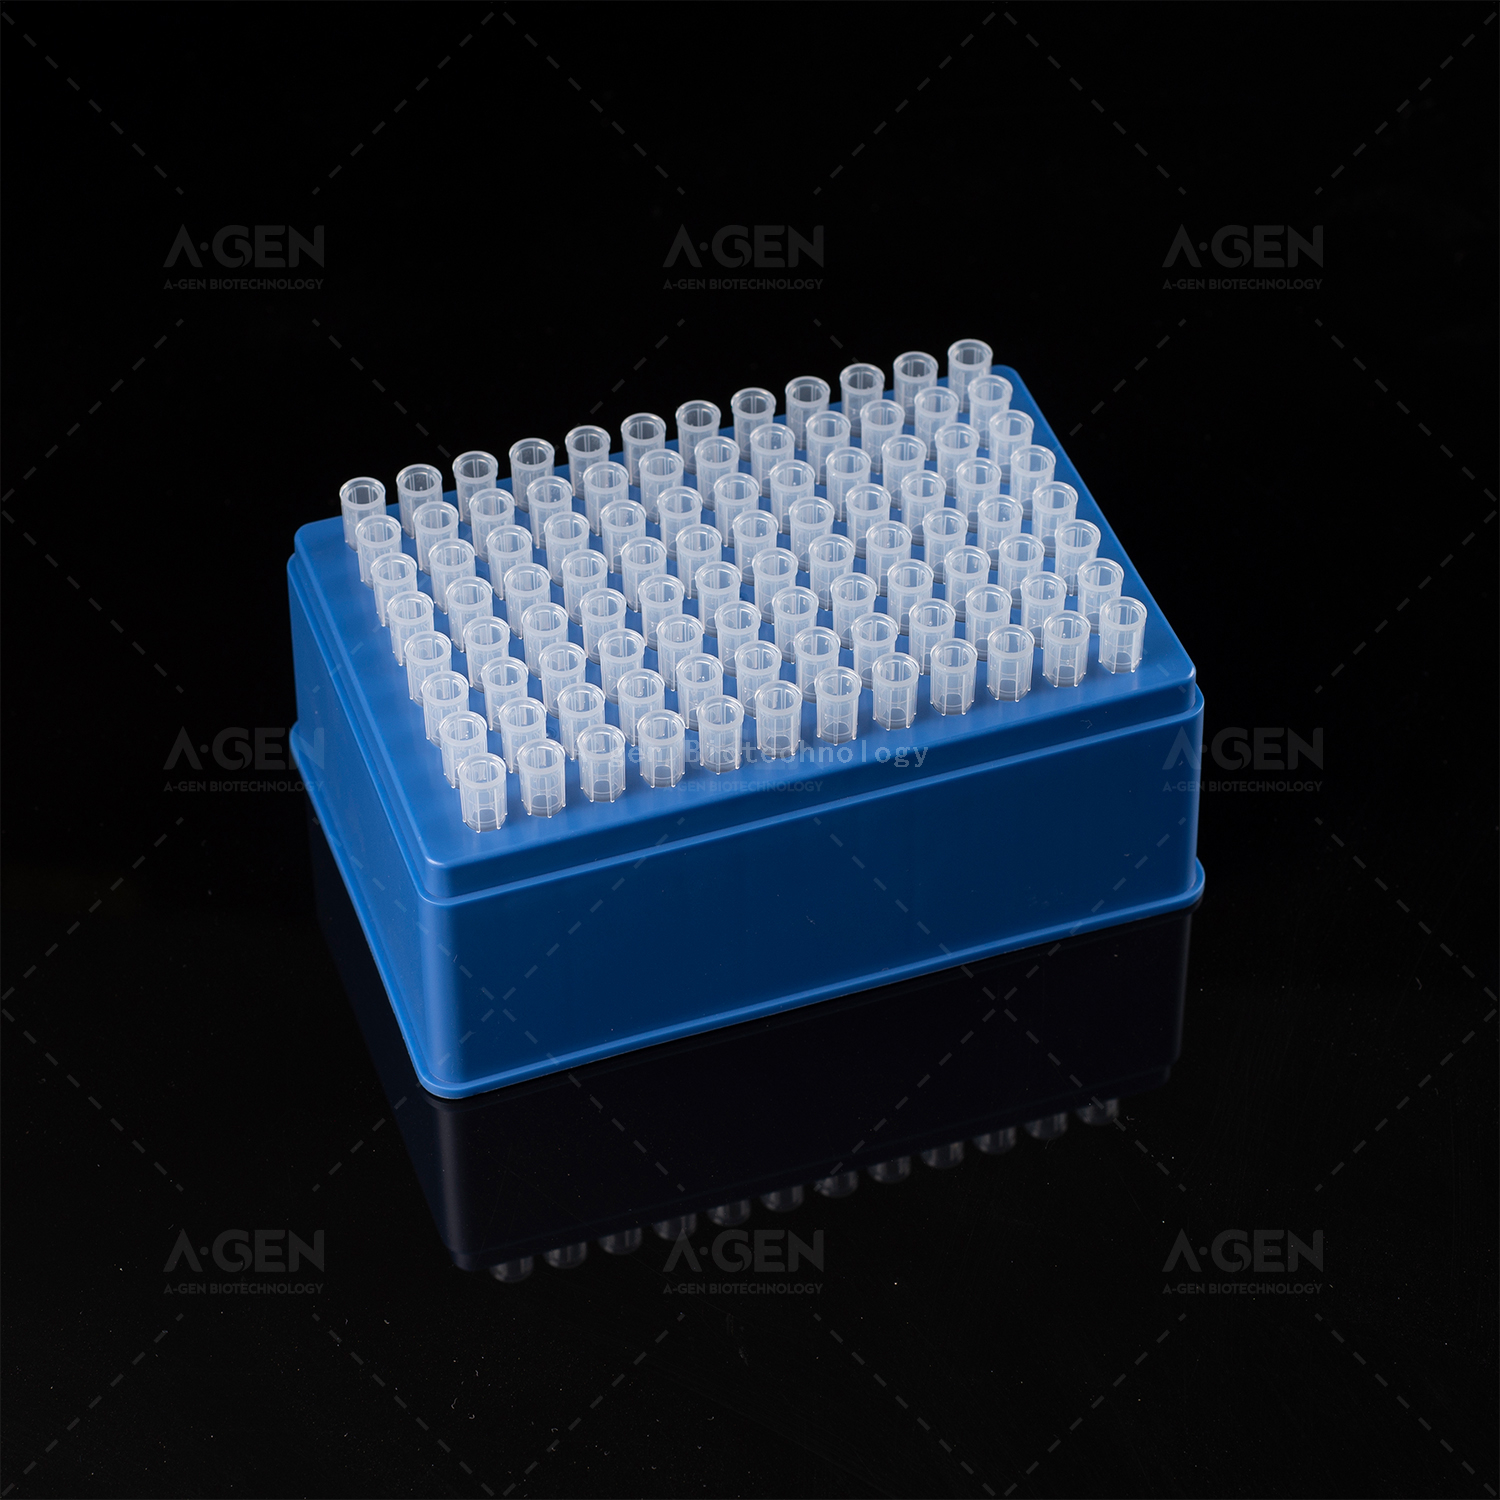 BECKMAN Tip 250μL Clear Robotic PP Pipette Tip (Racked,sterile) for Liquid Transfer No Filter